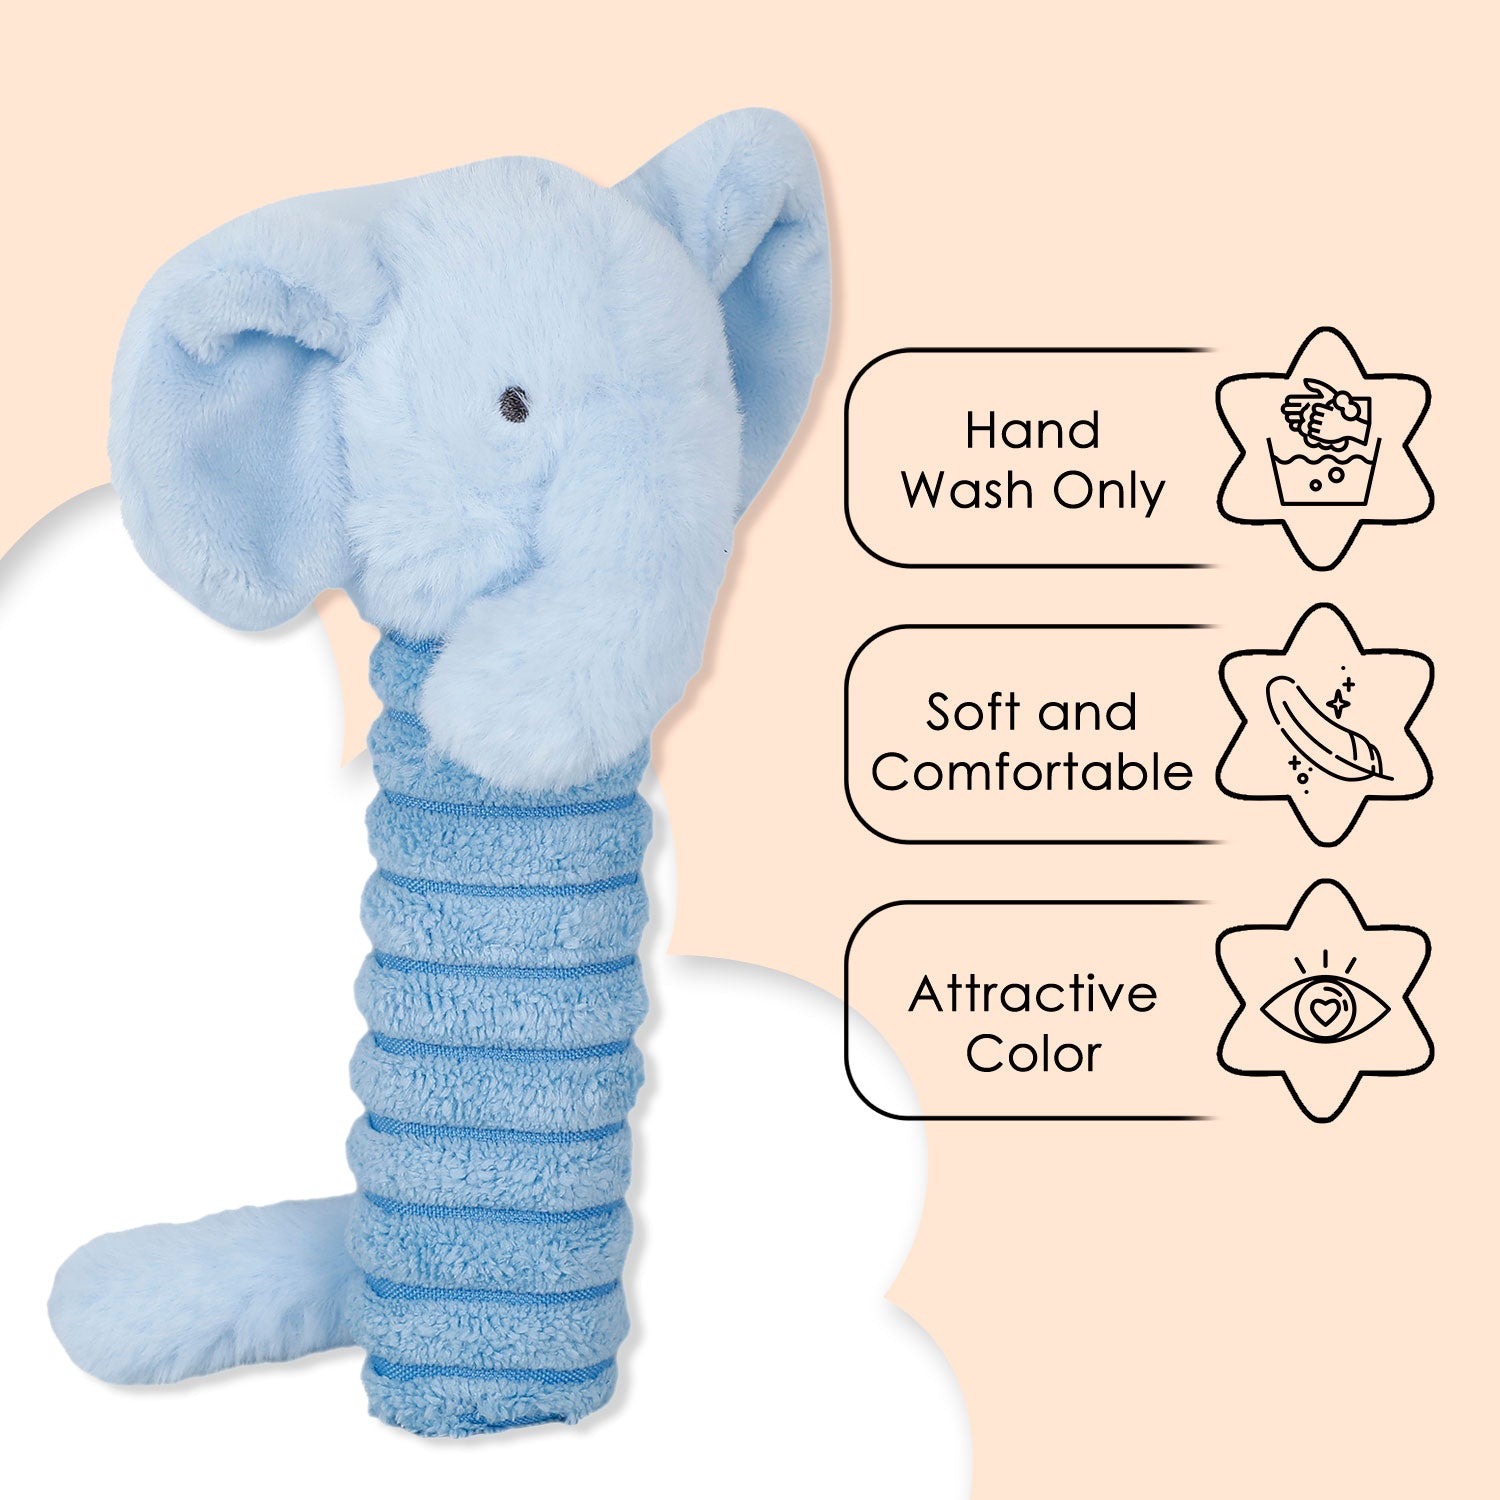 Baby Moo Elephant Squeaker And Rustle Paper Handheld Rattle Toy - Blue